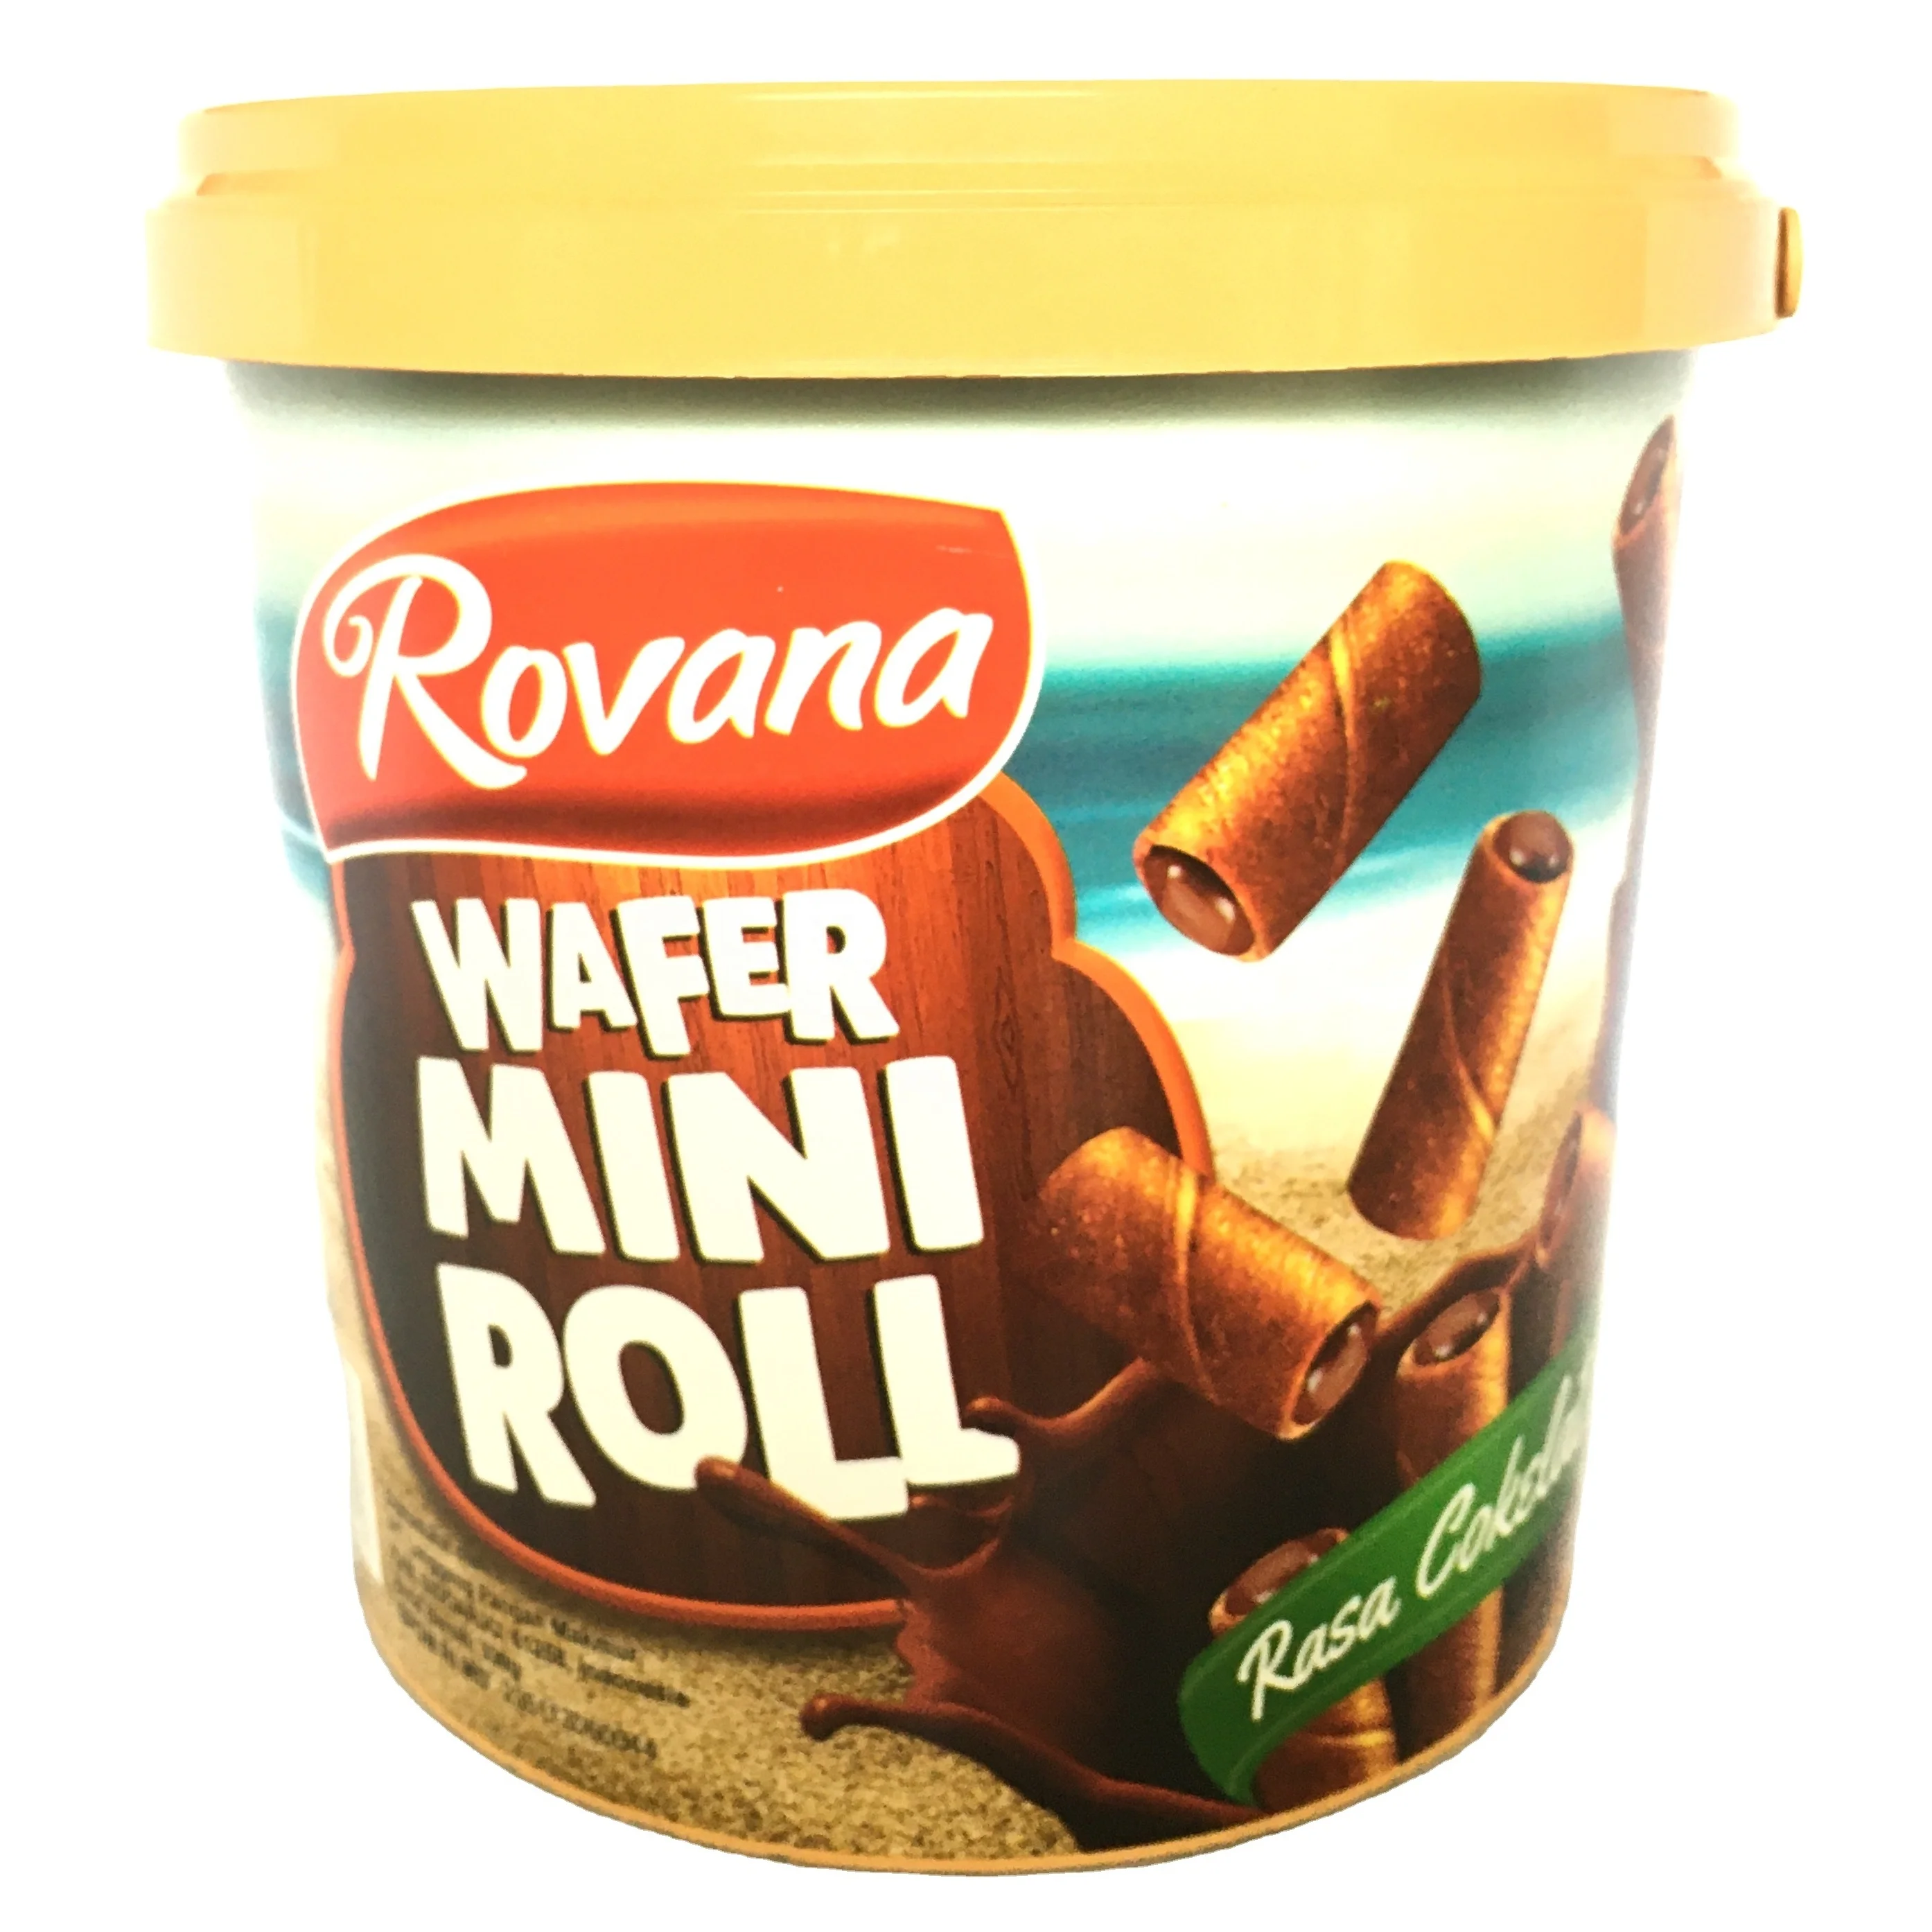 Hot Sell Mini Wafer Roll Full Chocolate Family Kids Snack Biscuit Manufacture , Rovana    OEM (10000003756284)